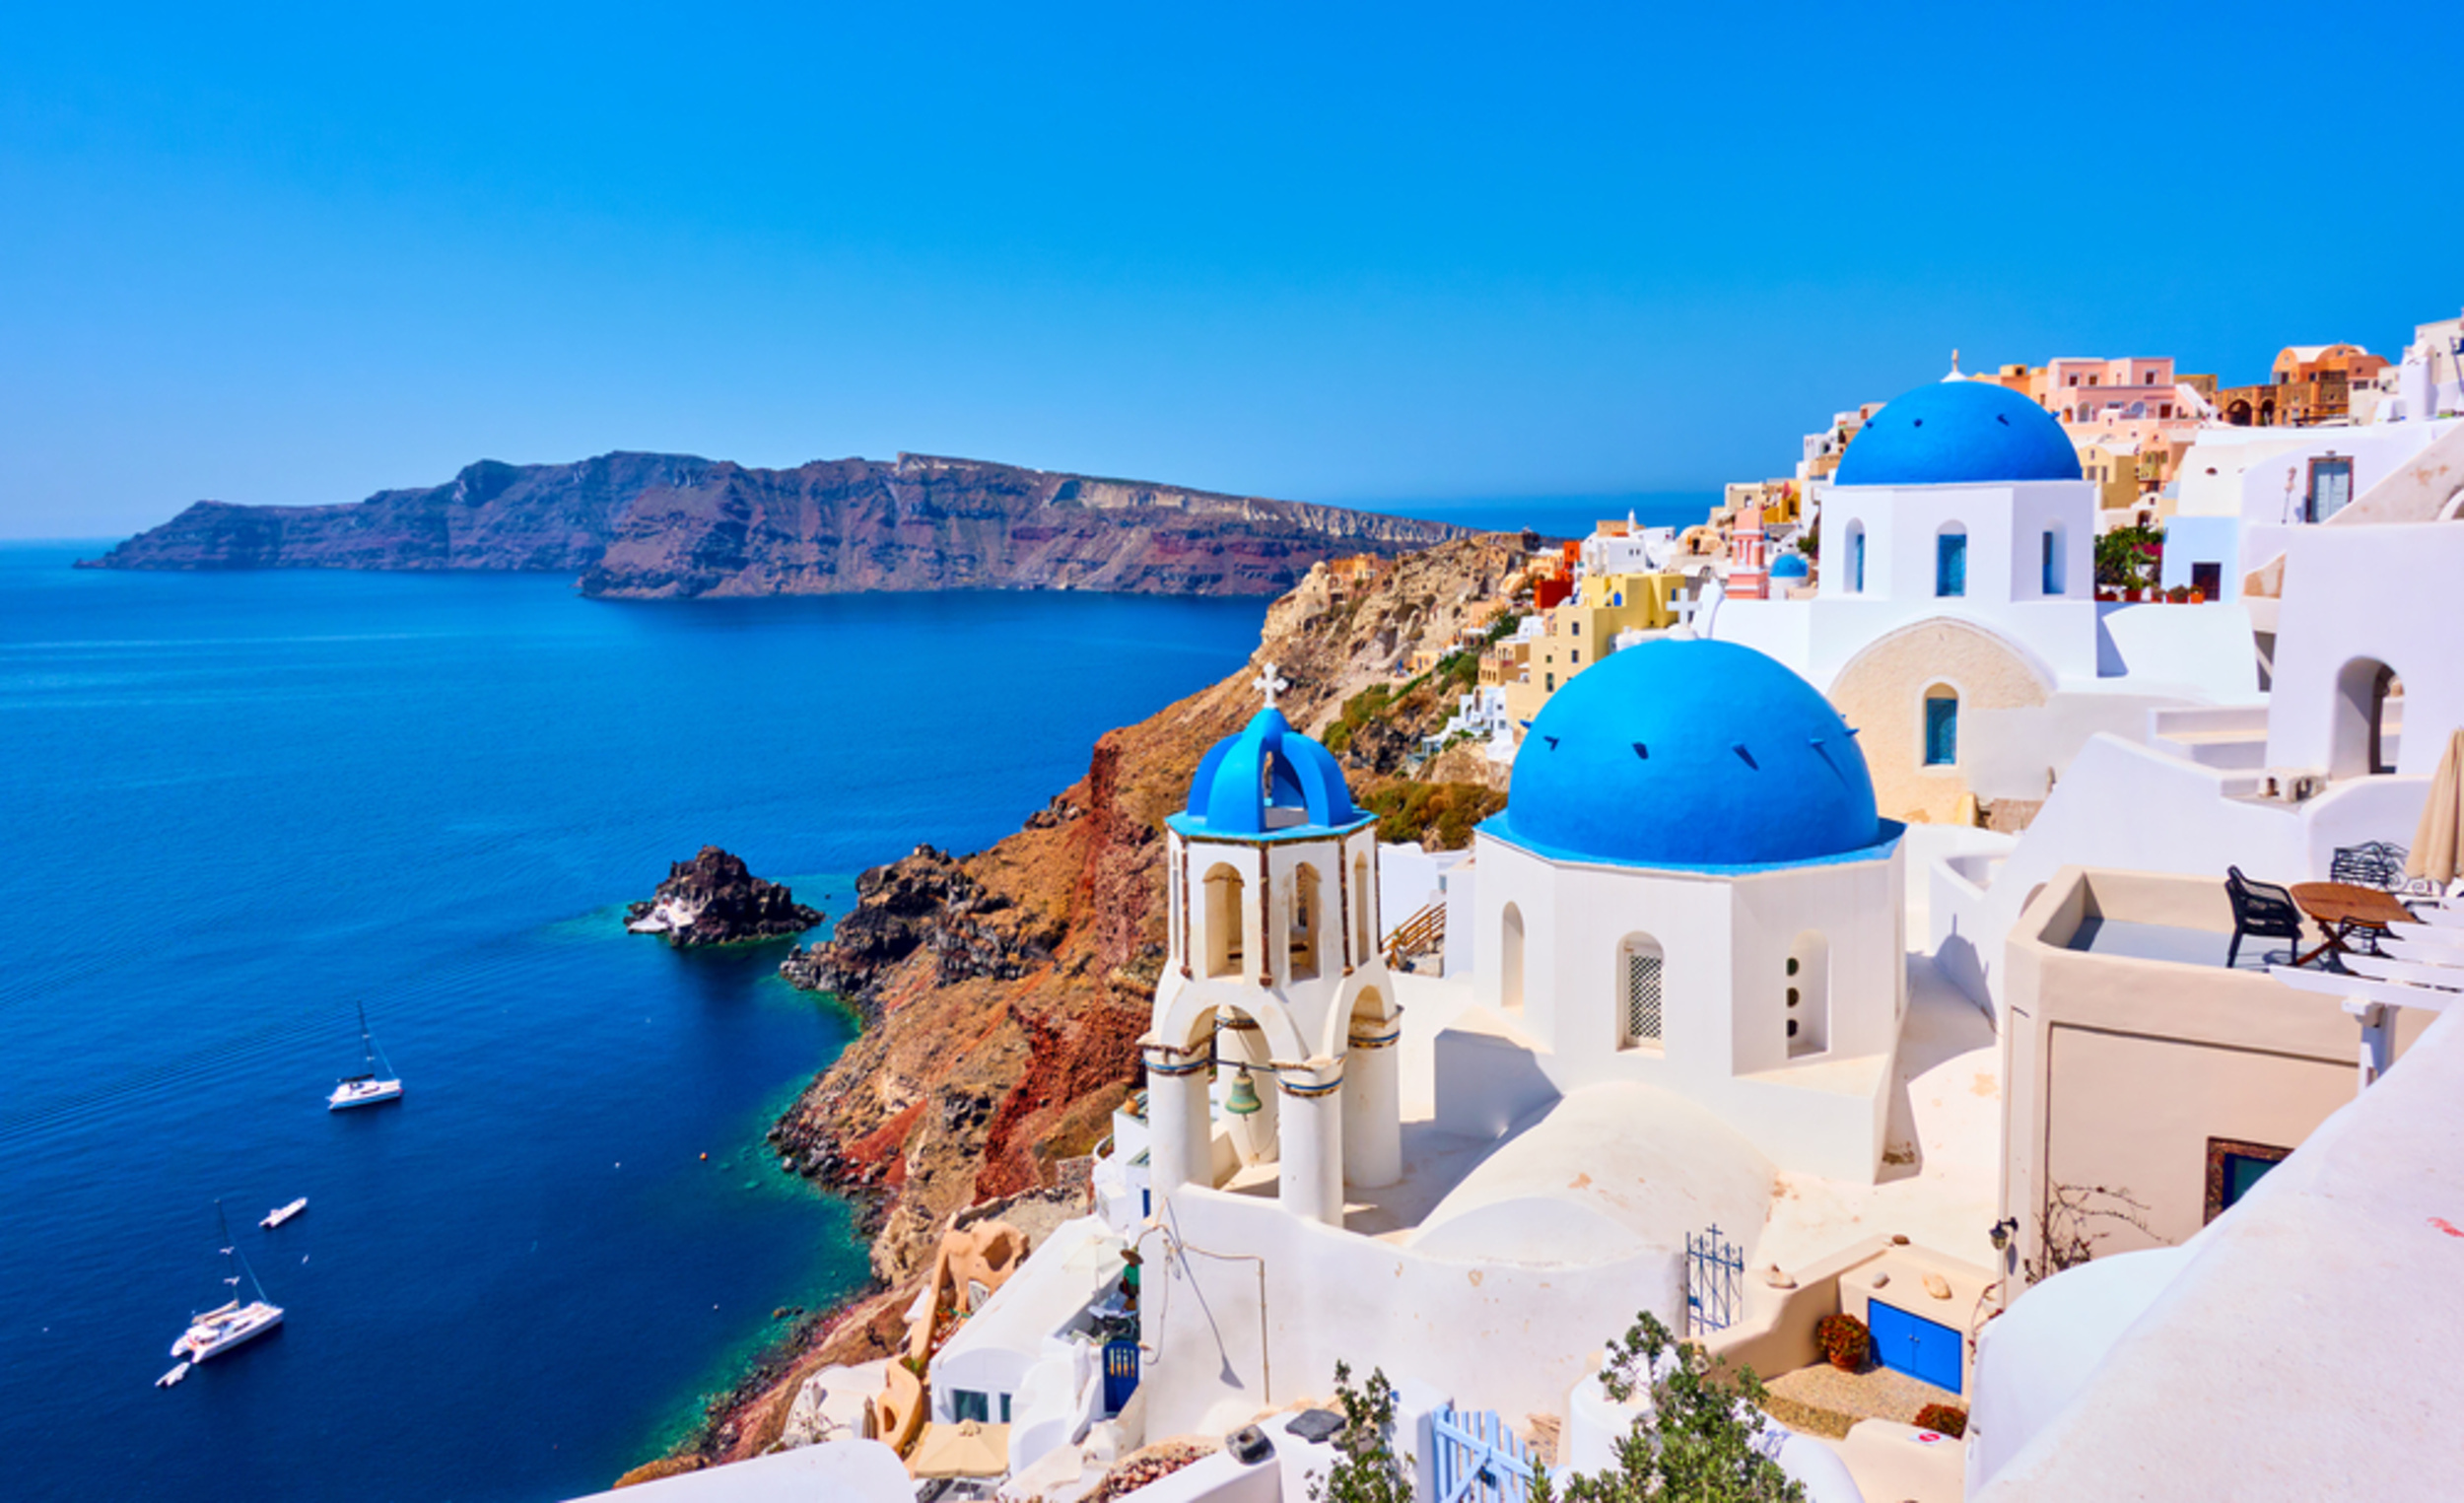 <p>Home to those iconic white-and-blue homes on the cliffside, Santorini remains one of Greece's most popular tourist destinations thanks to its luxe resorts, beautiful waters, and tons of historical ruins to explore. </p><p><a href='https://www.msn.com/en-us/community/channel/vid-cj9pqbr0vn9in2b6ddcd8sfgpfq6x6utp44fssrv6mc2gtybw0us'>Follow us on MSN to see more of our exclusive lifestyle content.</a></p>